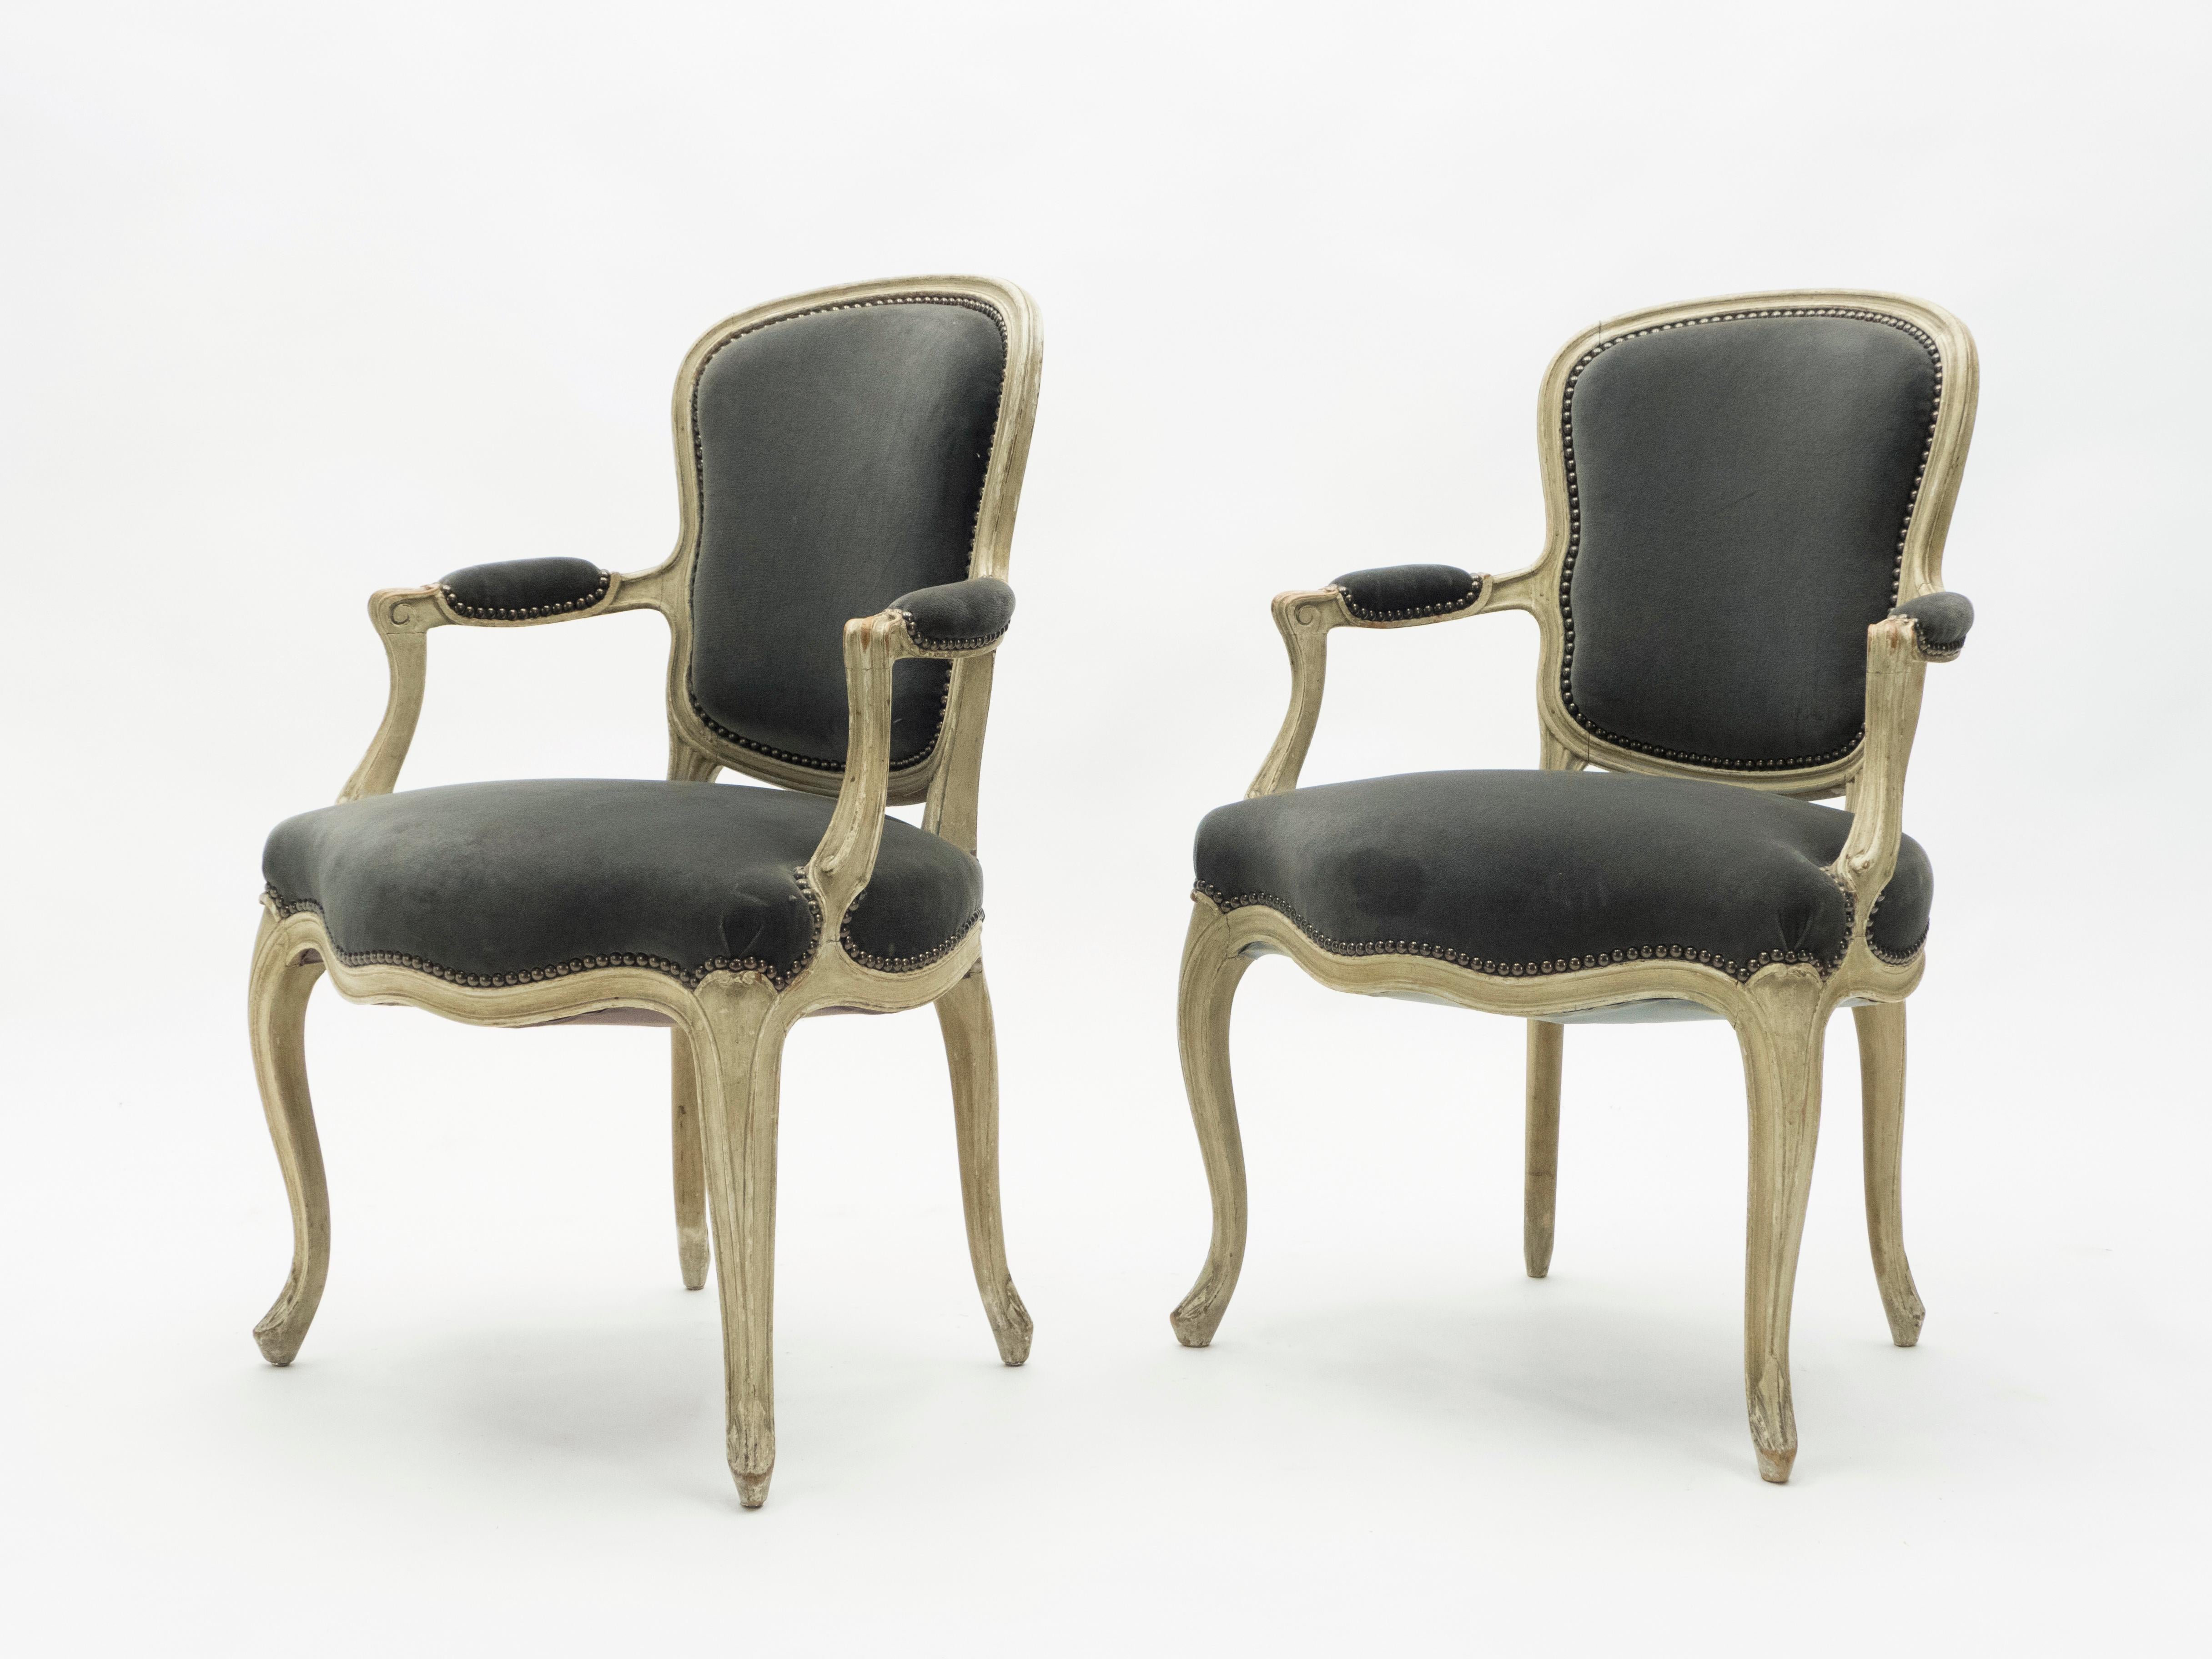 Metal Rare Pair of Stamped Maison Jansen Louis XV Neoclassical Armchairs, 1940s For Sale